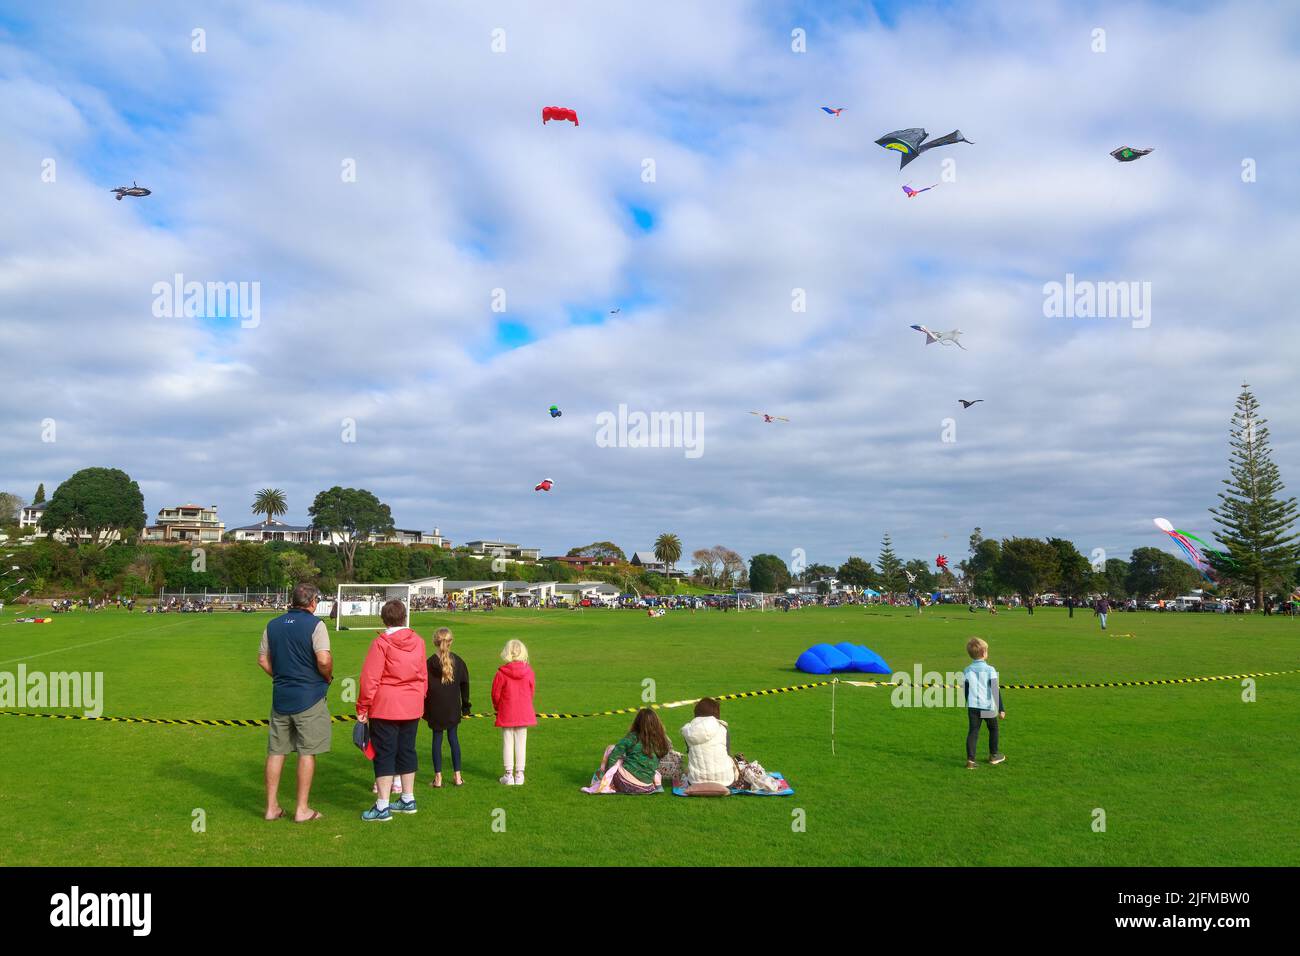 People look at a sky full of kites during celebrations of Matariki, the Maori new year, in Fergusson Park, Tauranga, New Zealand Stock Photo